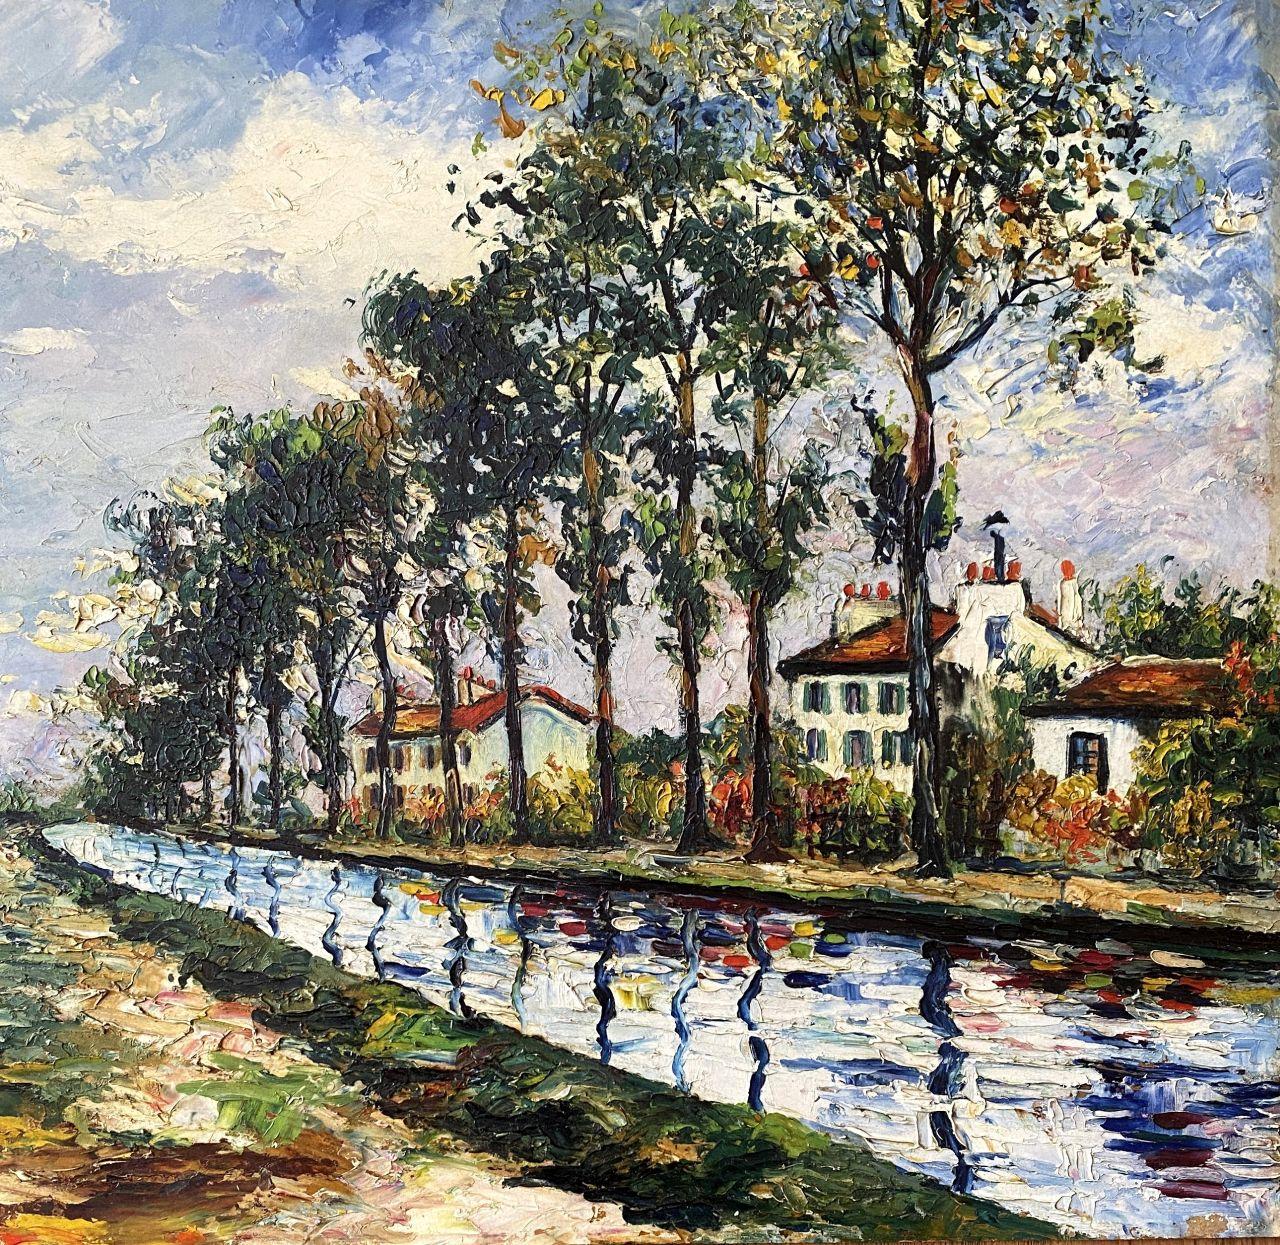 Elisée Maclet
Reflections in the canal

Oil on panel, c. 1920
Hand signed at bottom left
On panel size 46 x 55 cm (c. 18 x 21.5 in)
Very good condition